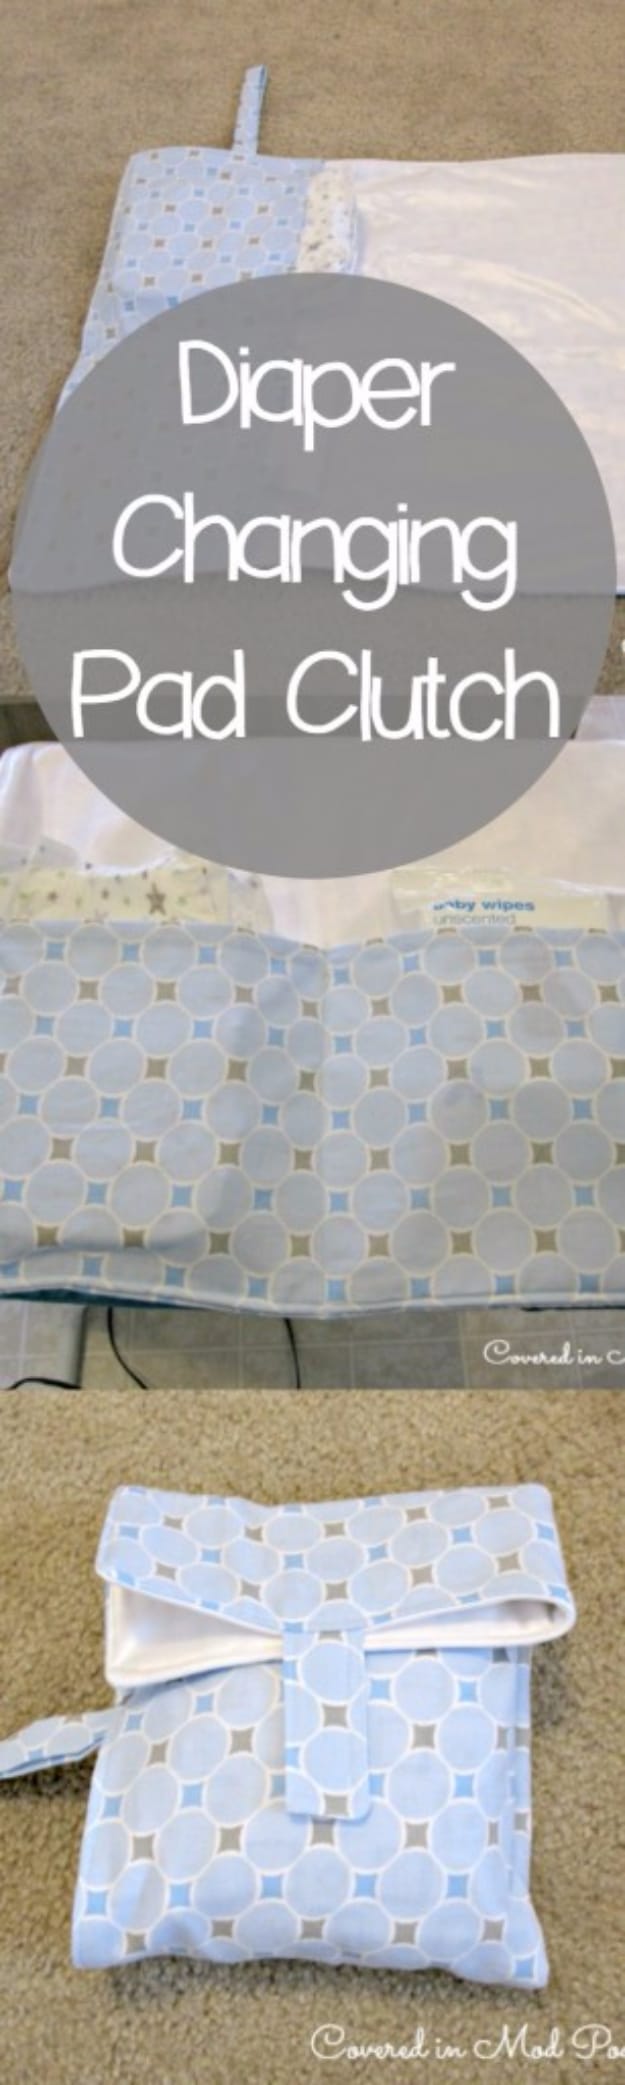 DIY Gifts for Babies - Diaper Changing Pad Clutch - Best DIY Gift Ideas for Baby Boys and Girls - Creative Projects to Sew, Make and Sell, Gift Baskets, Diaper Cakes and Presents for Baby Showers and New Parents. Cool Christmas and Birthday Ideas #diy #babygifts #diygifts #baby